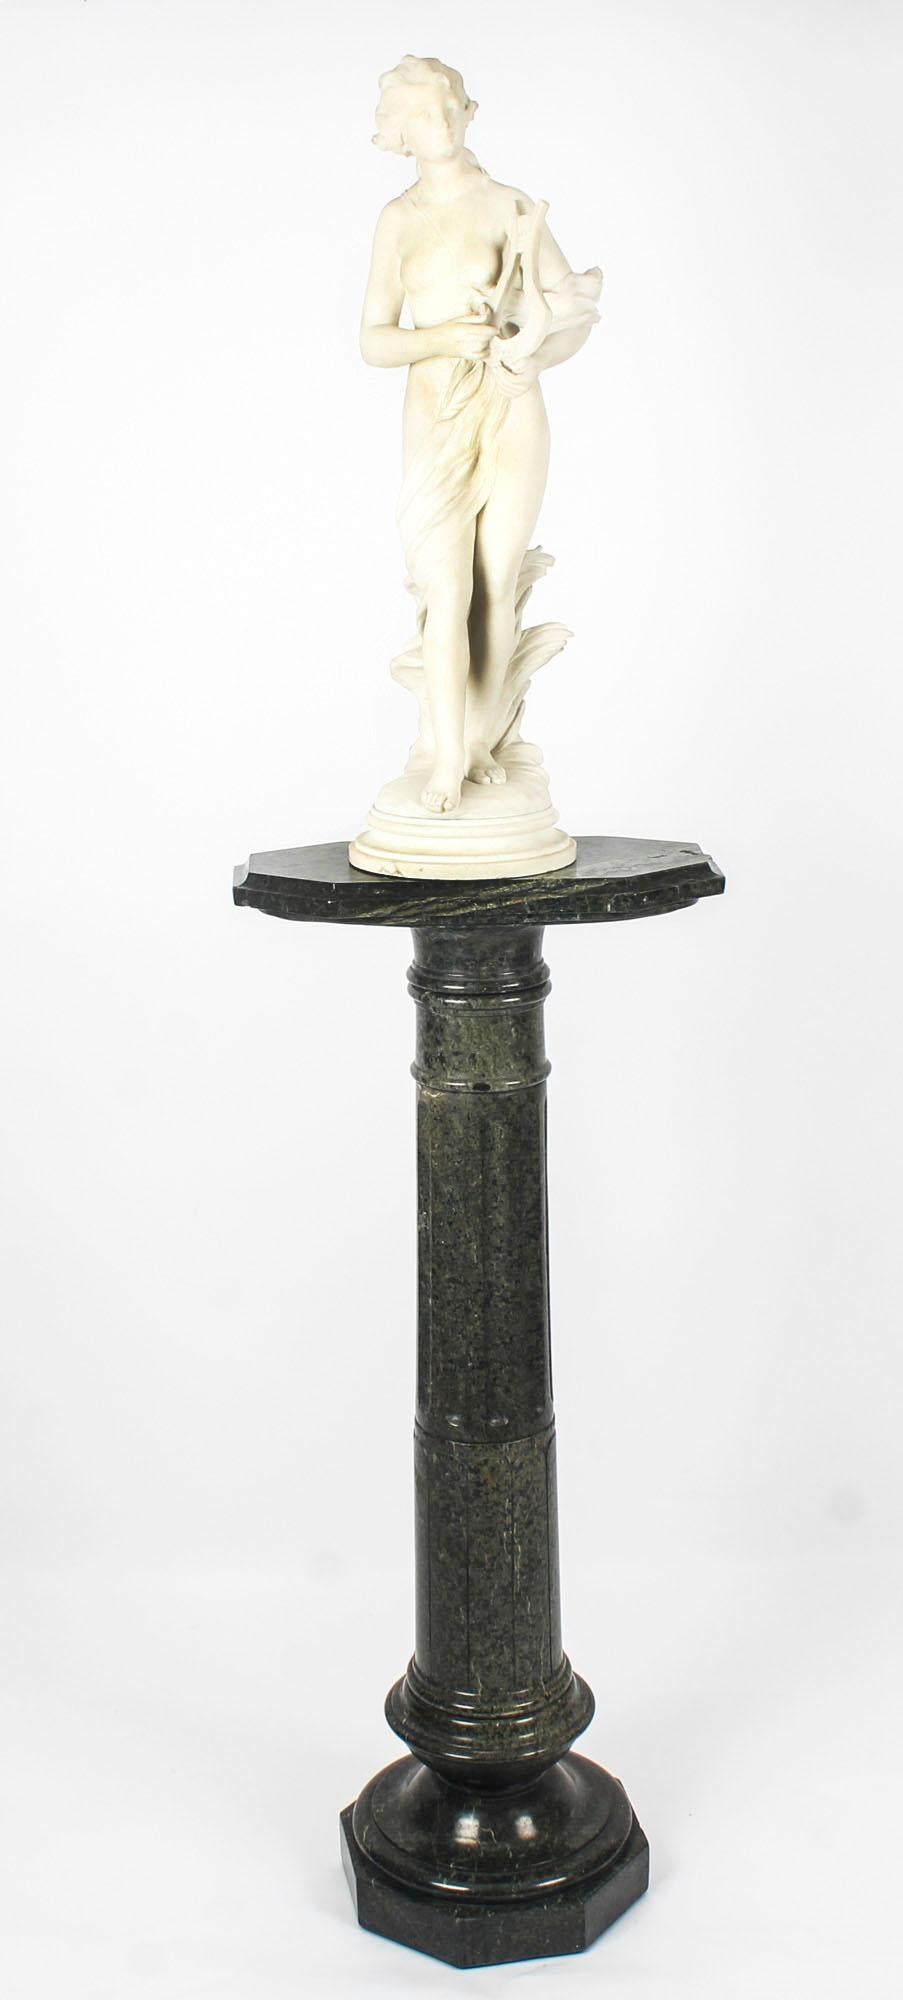 This beautiful Italian white Carrara marble sculpture of terpsichore bears the signature of the sculptor, T.Dini and late 19th century in date. It is raised on a stunning antique serpentine marble pedestal. This sensitively carved sculpture depicts